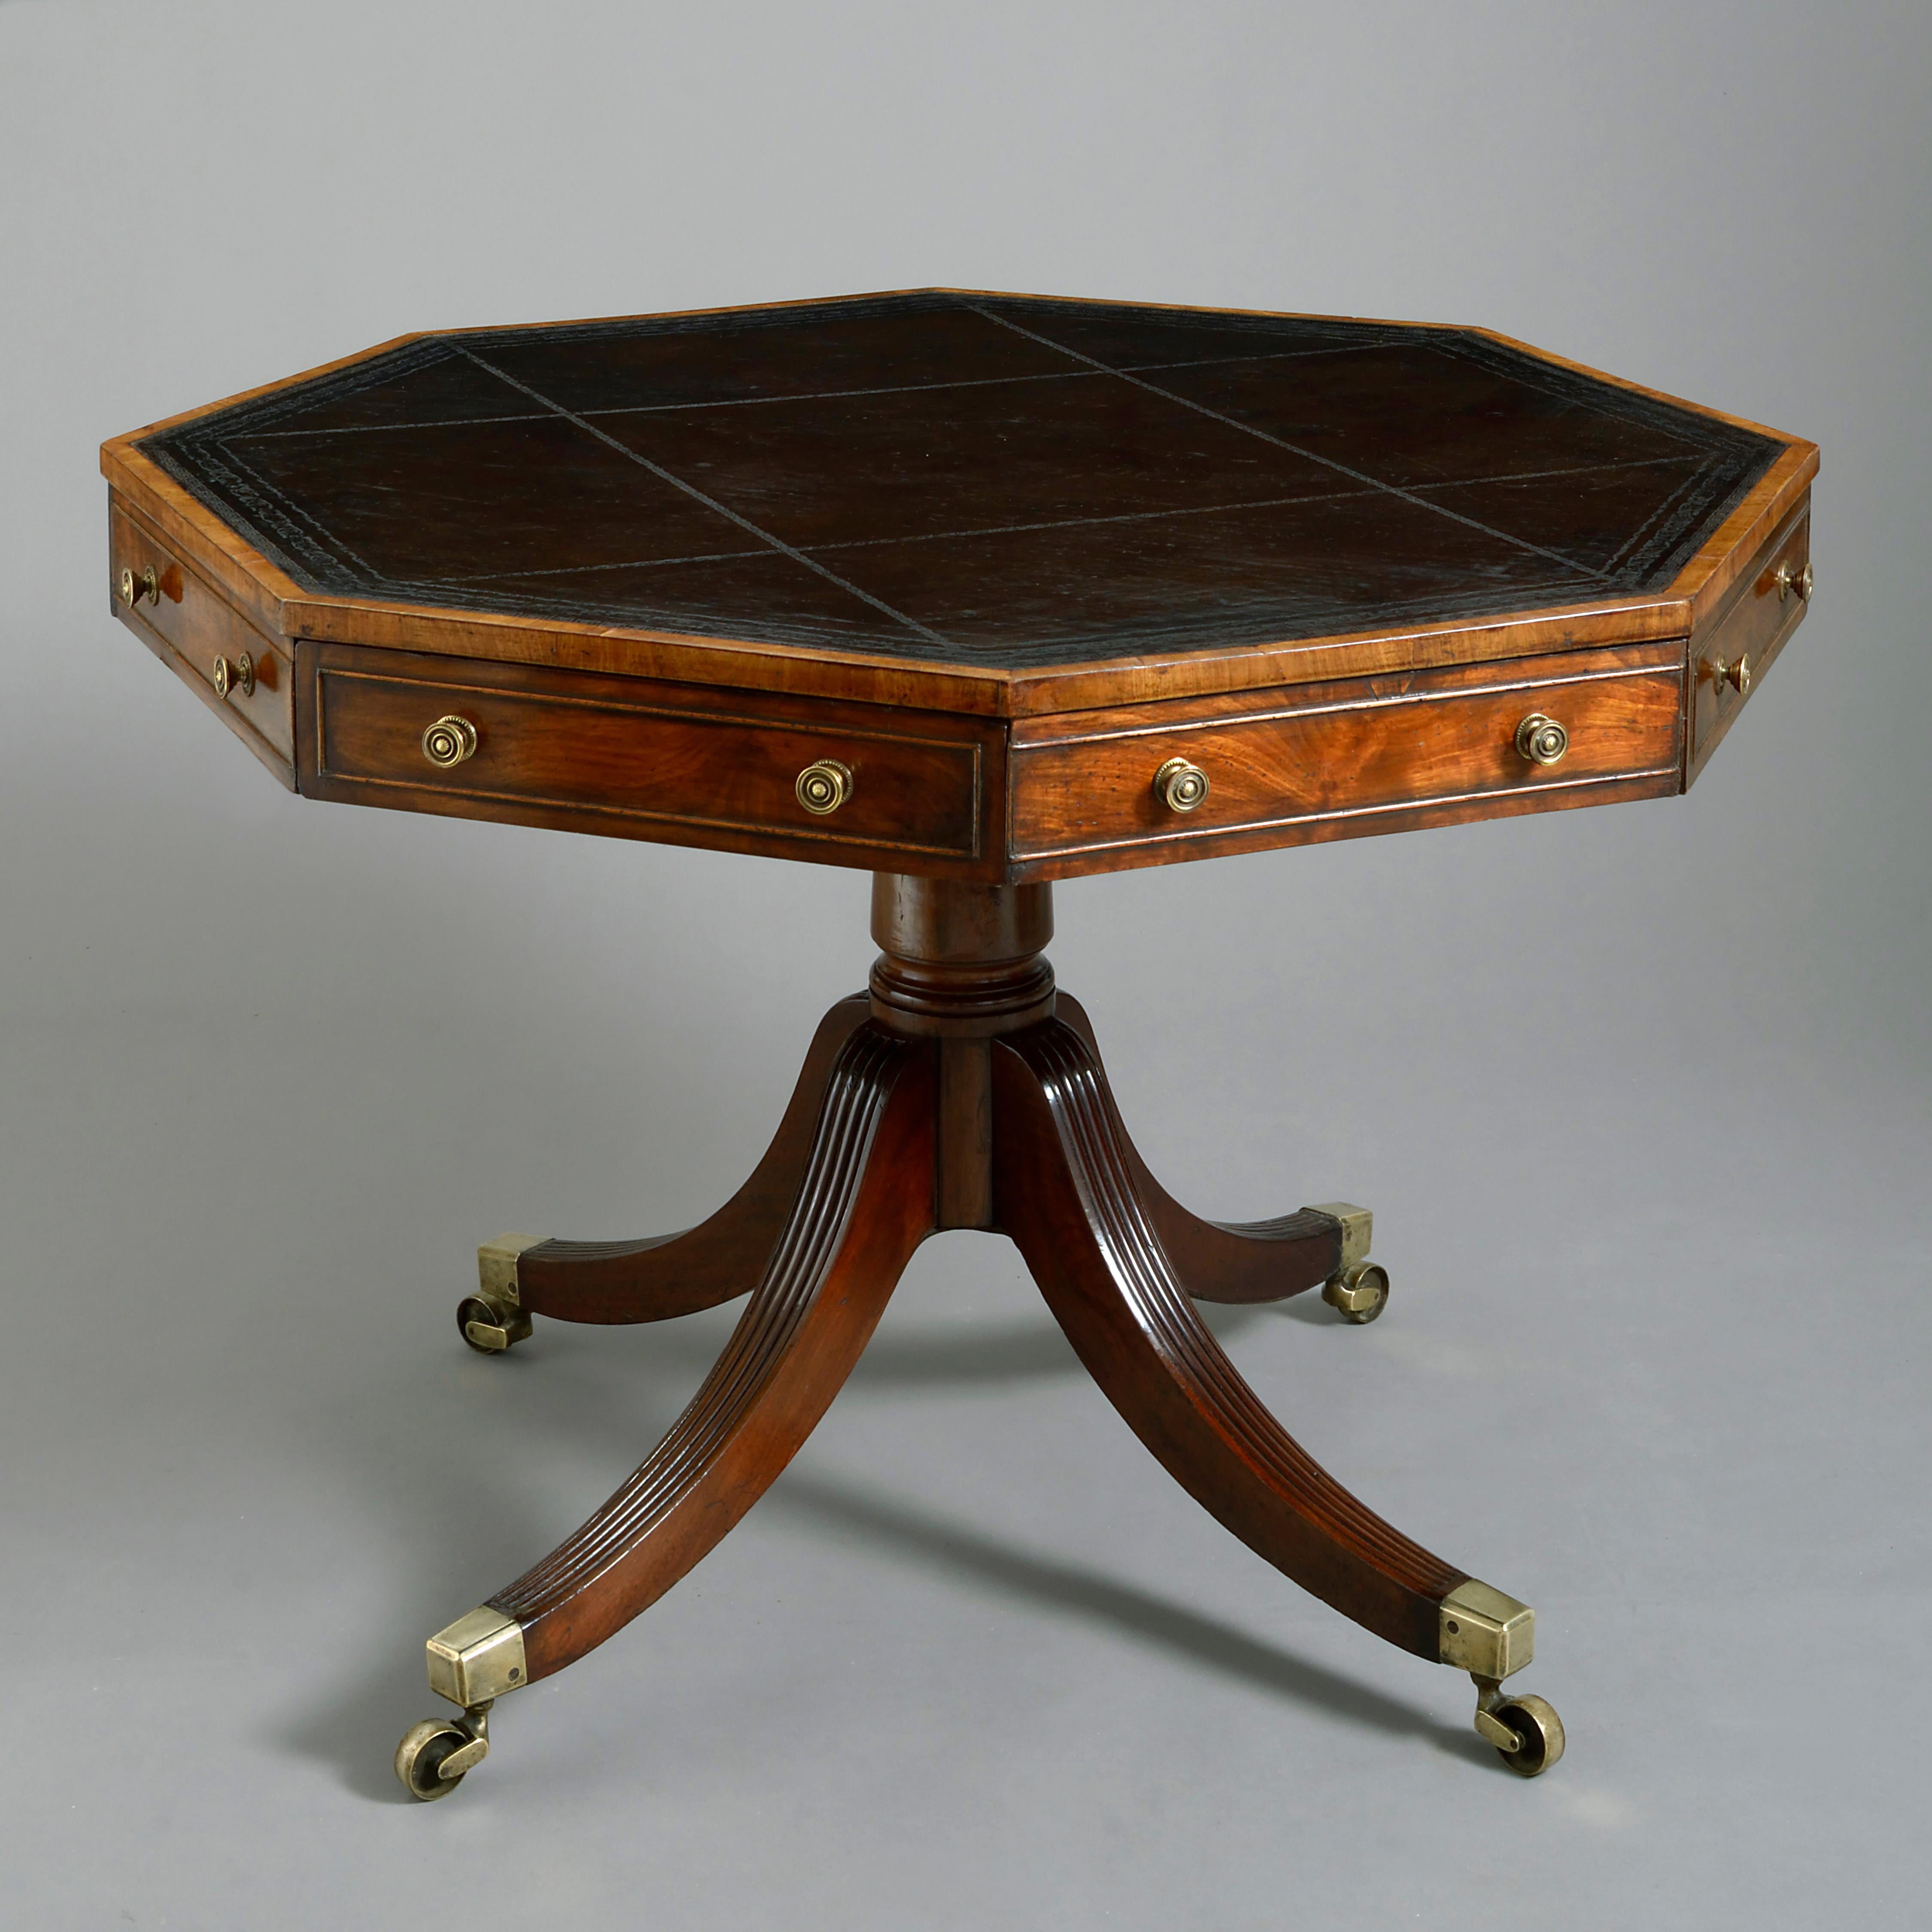 English Early 19th Century George III Period Mahogany Rent Table